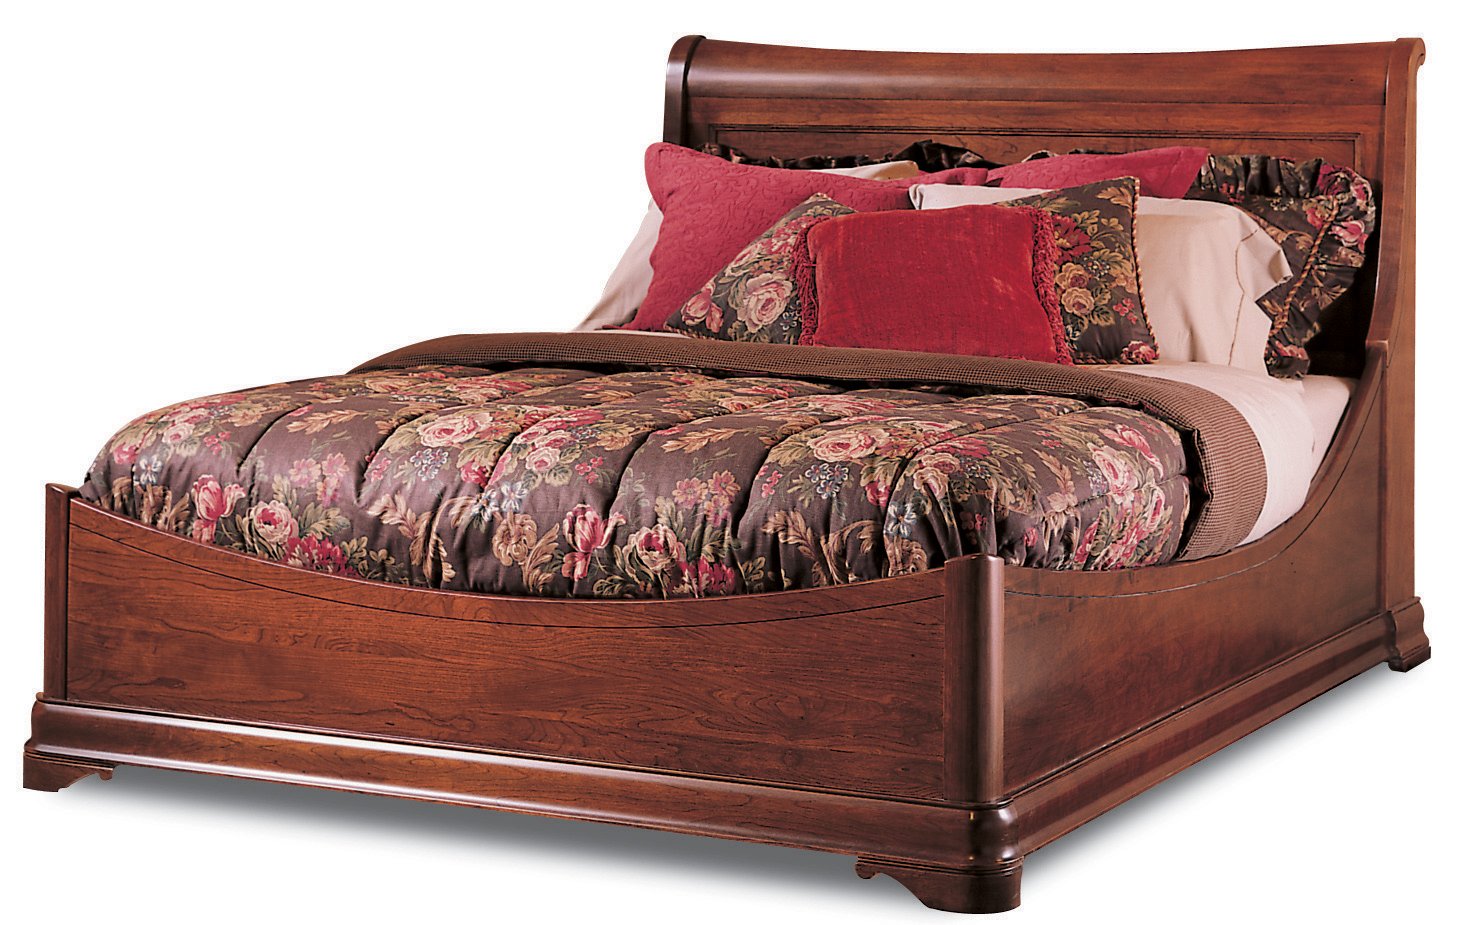 Chateau Fontaine King Euro Bed